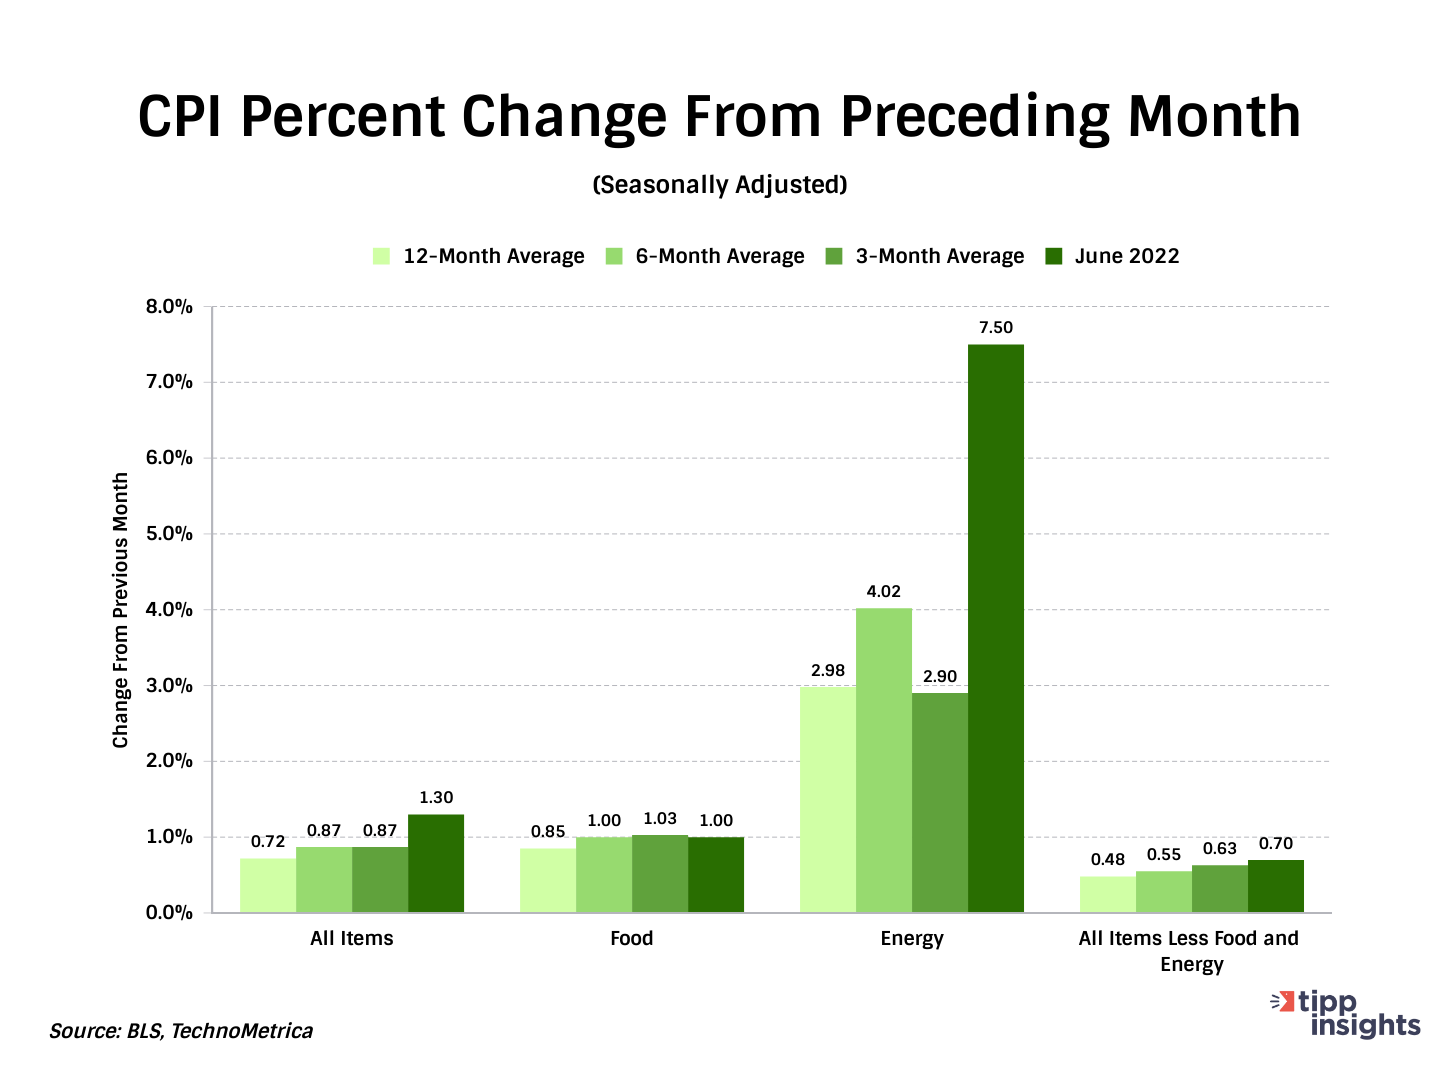 Consumer price index (CPI) percent change from proceeding month